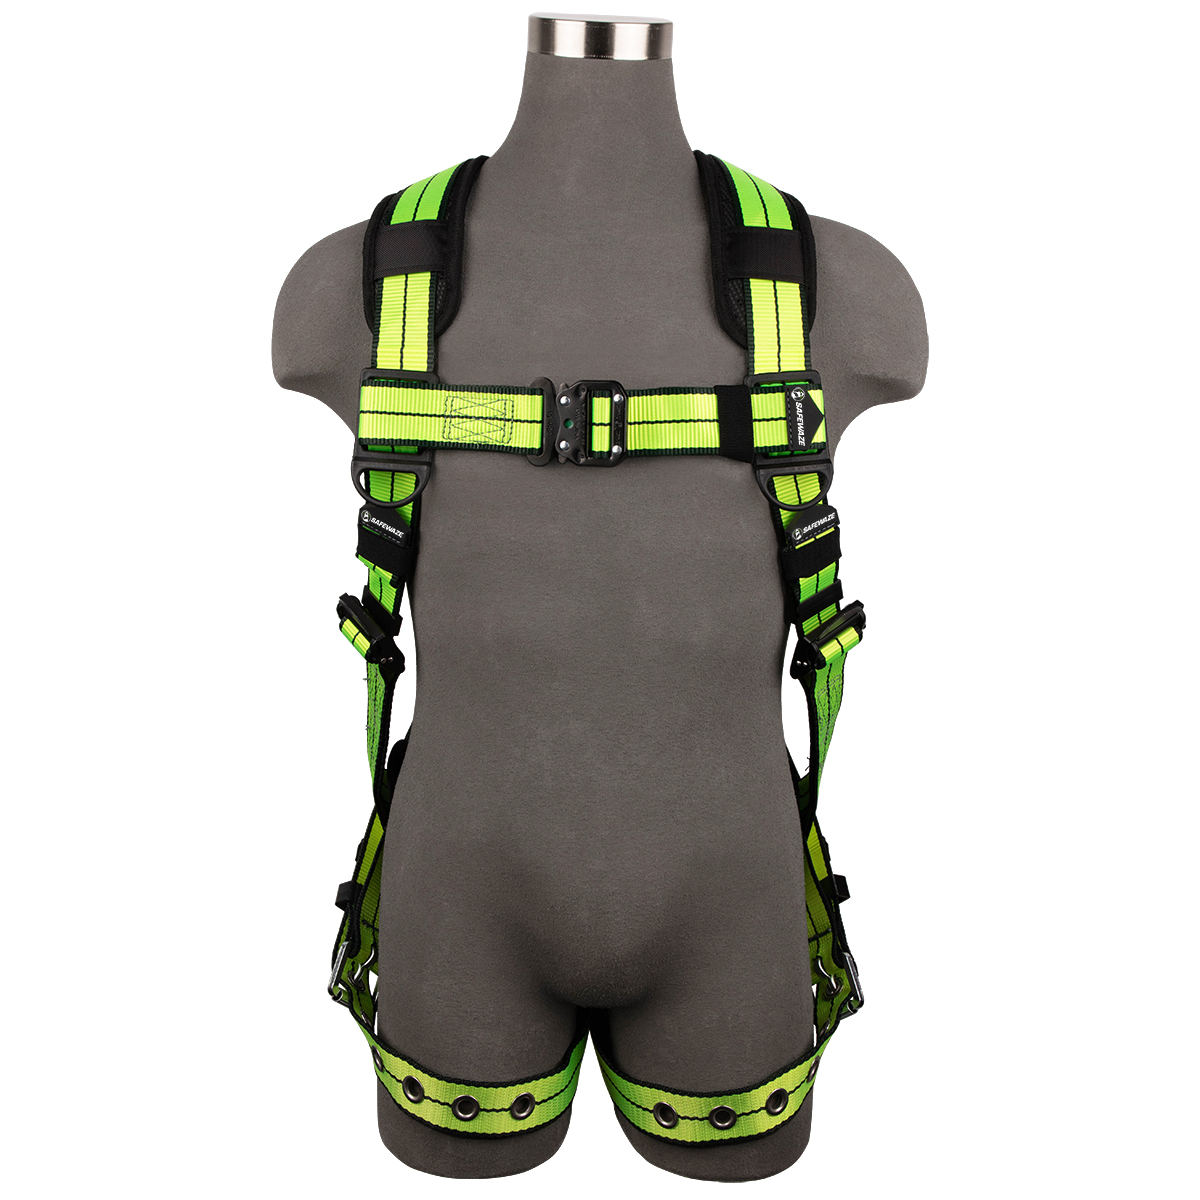 PRO Plus Full Body Harness: 1D, QC Chest, TB Legs, Large/X-Large - Fall Protection